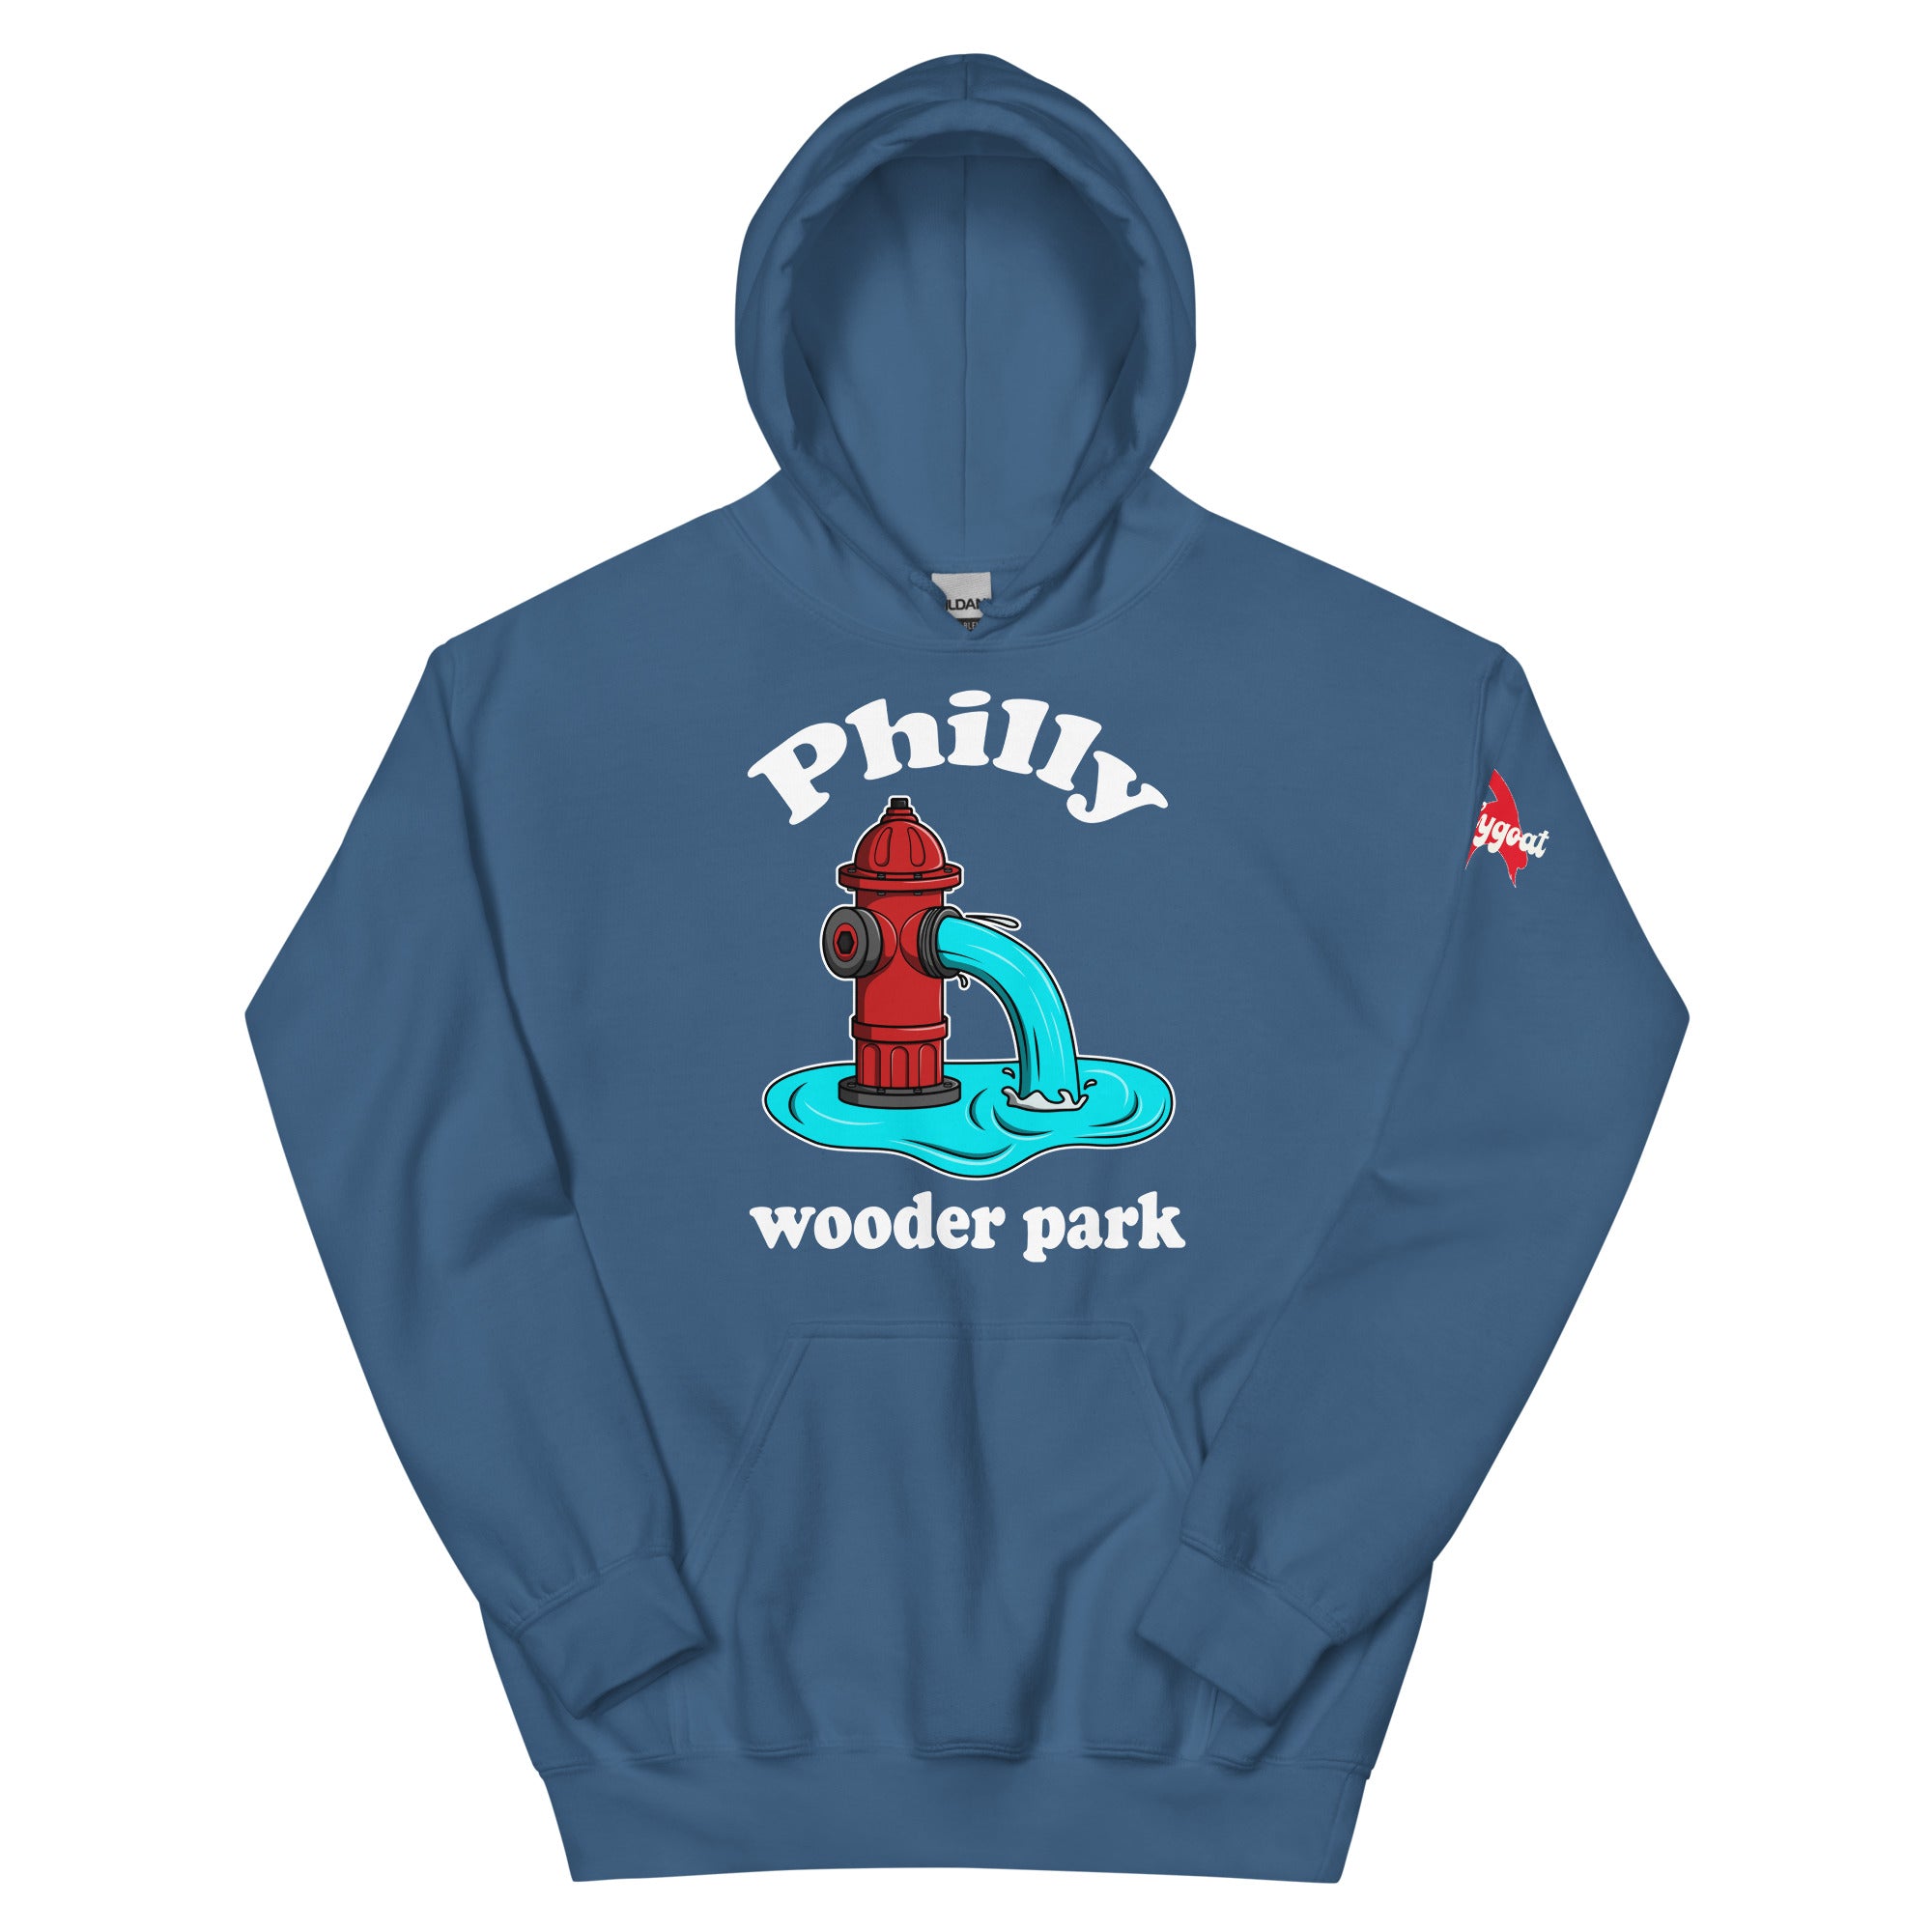 Philadelphia Philly wooder park water park fire hydrant funny indigo blue hoodie from Phillygoat